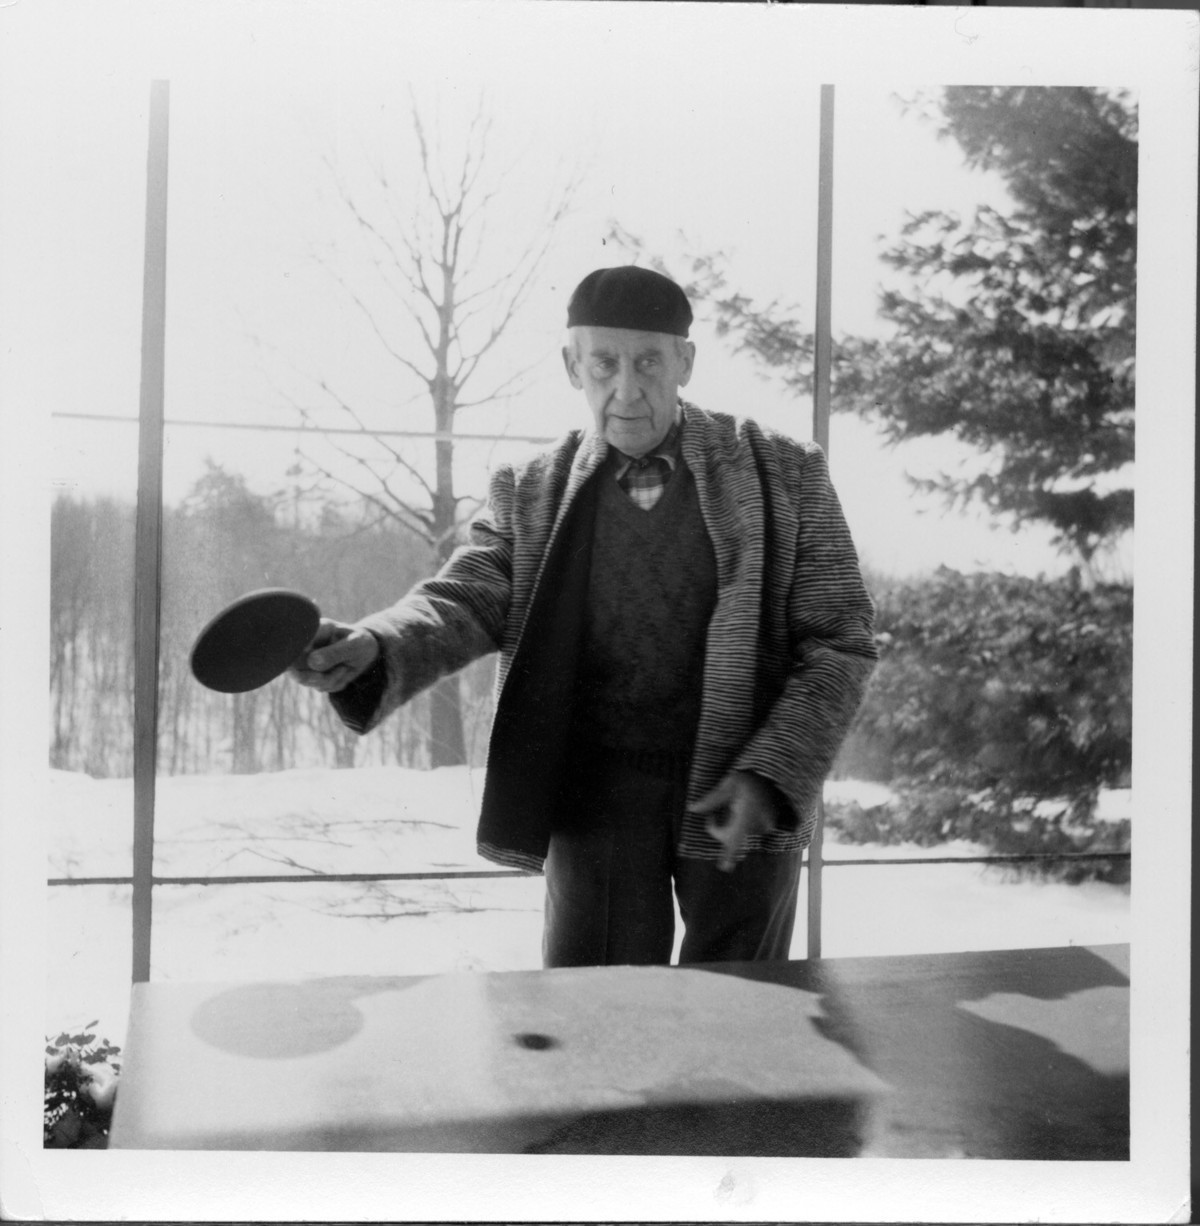 Walter Gropius playing Ping-Pong, Gropius House, Lincoln, Massachusetts, date unknown. Courtesy of Historic New England.